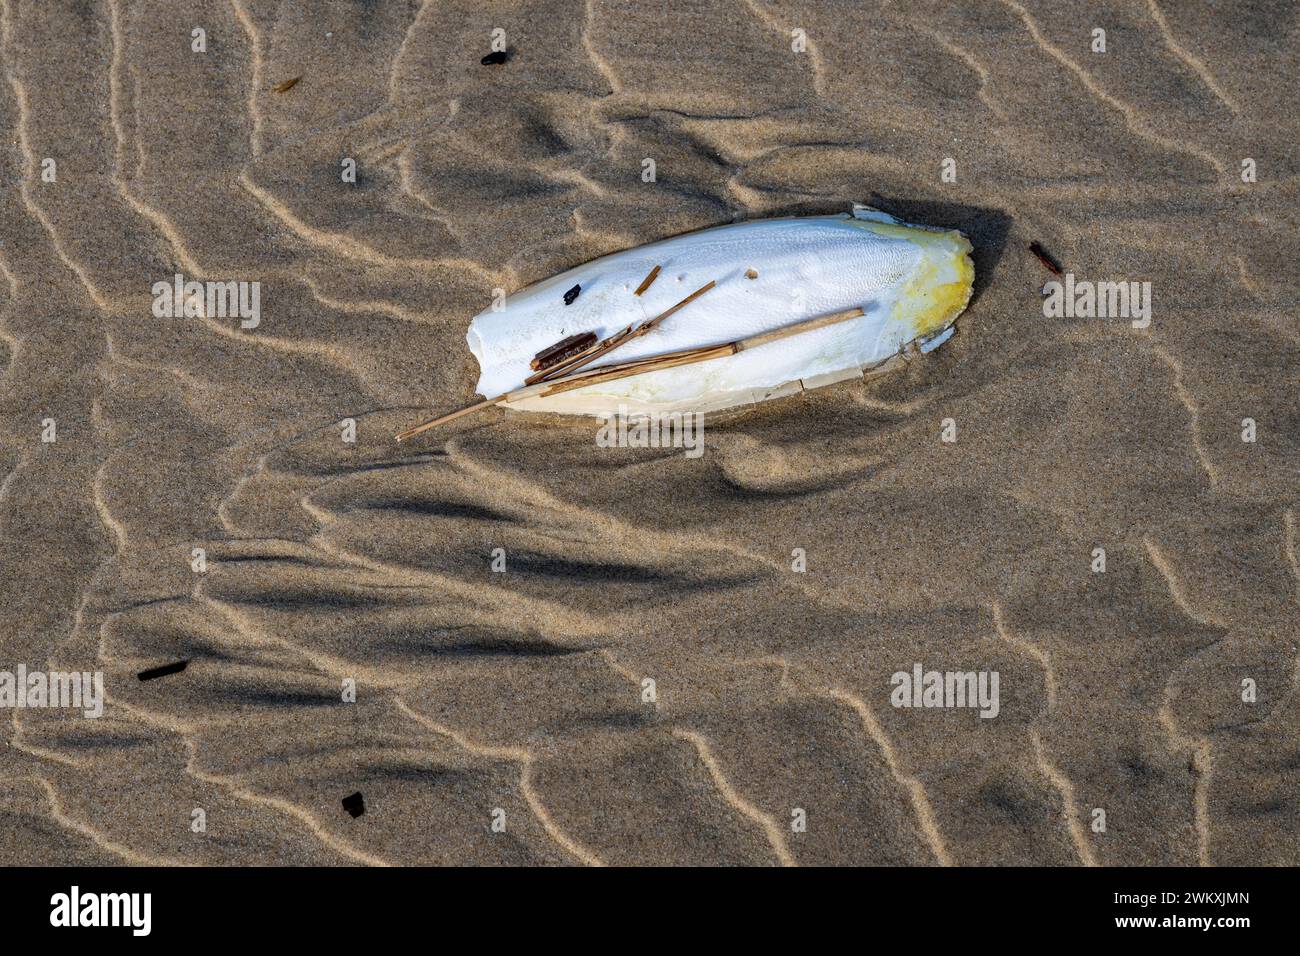 Cuttlefish shell washed up on a sandy beach, buoyant body and inner shell of the European common cuttlefish (Sepia officinalis), Monte Real, Portugal, Stock Photo